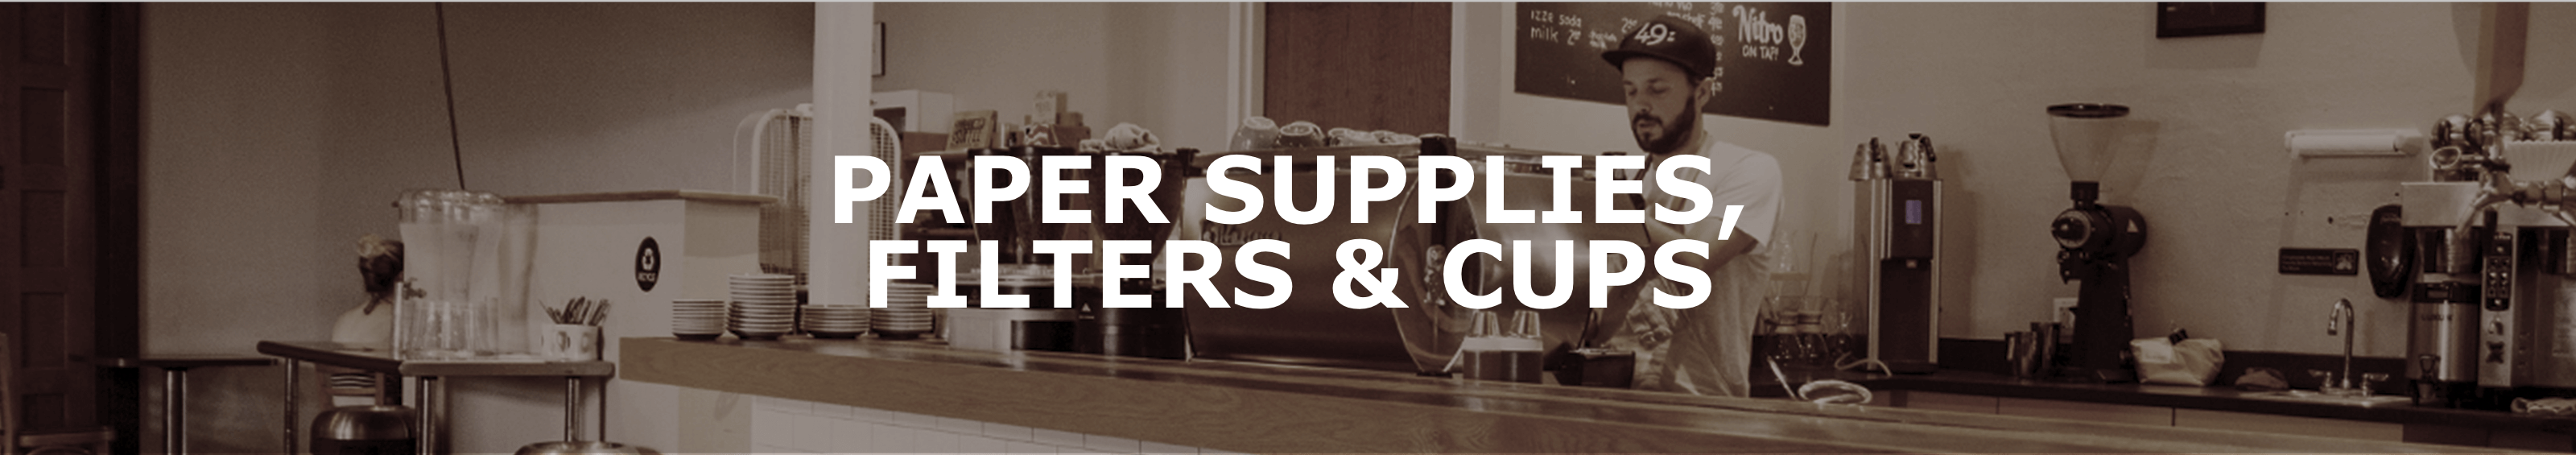 Paper Supplies, Filters & Cups